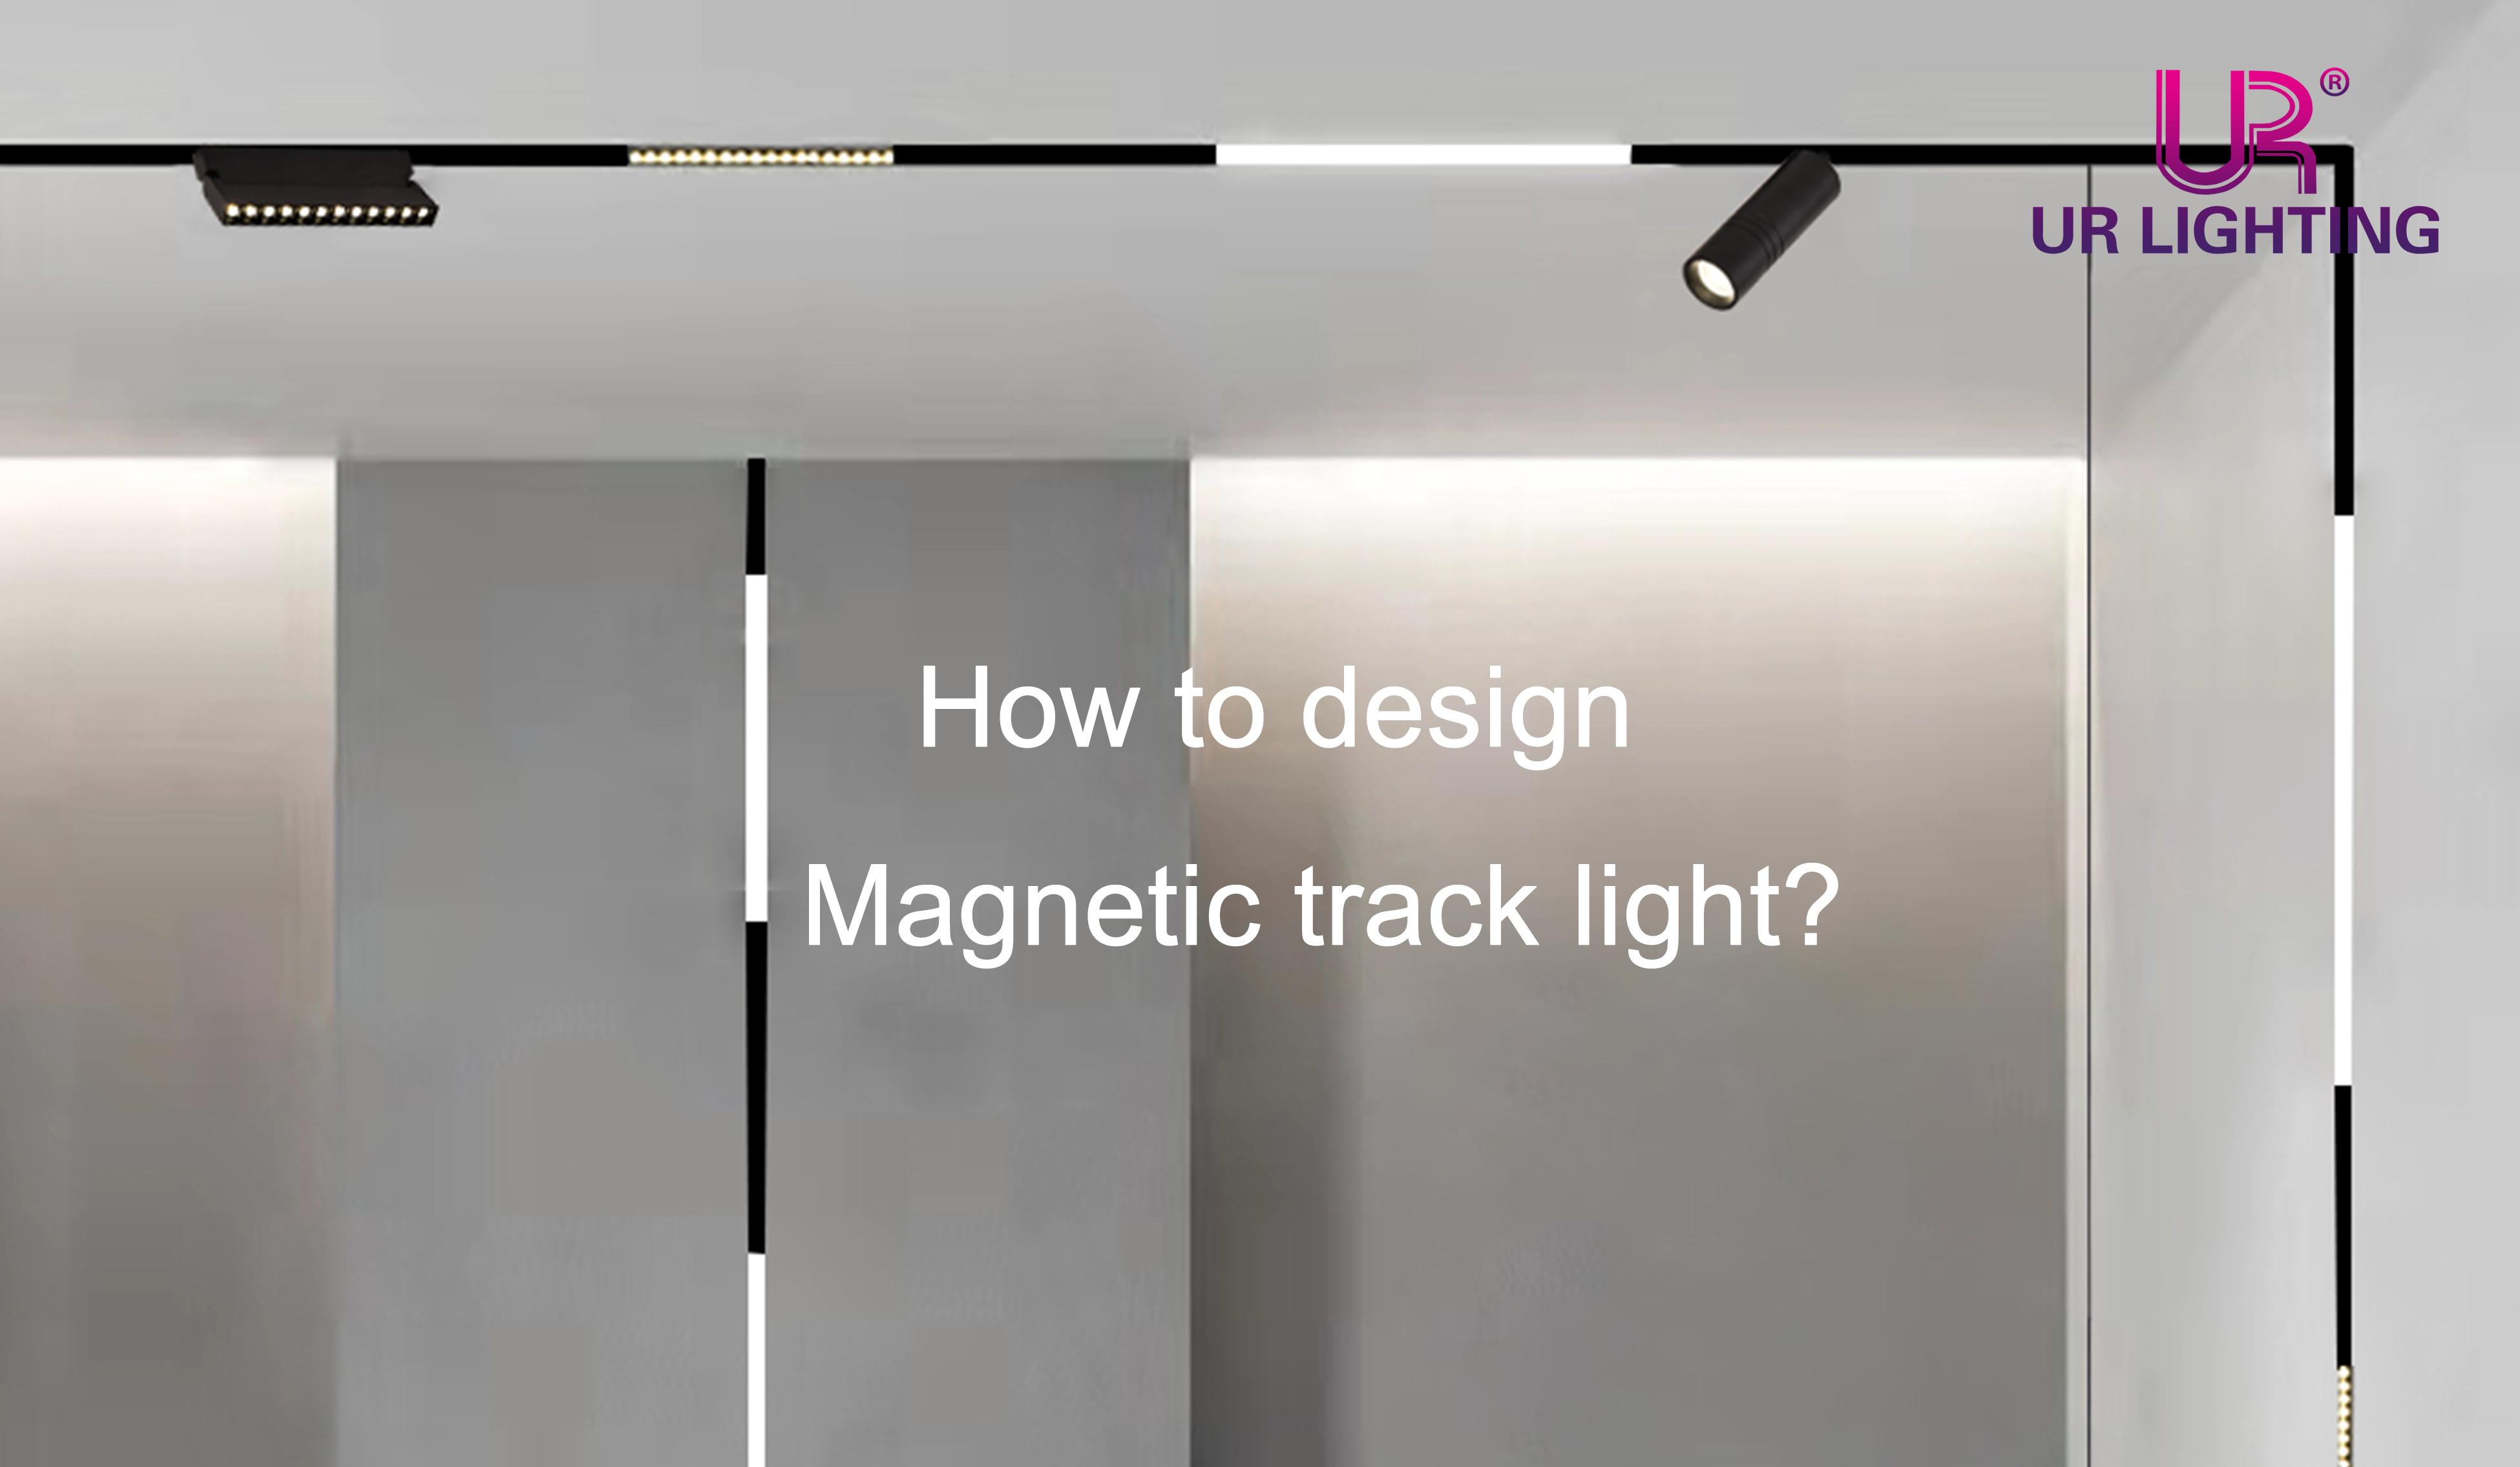 How to design magnetic track linear light?